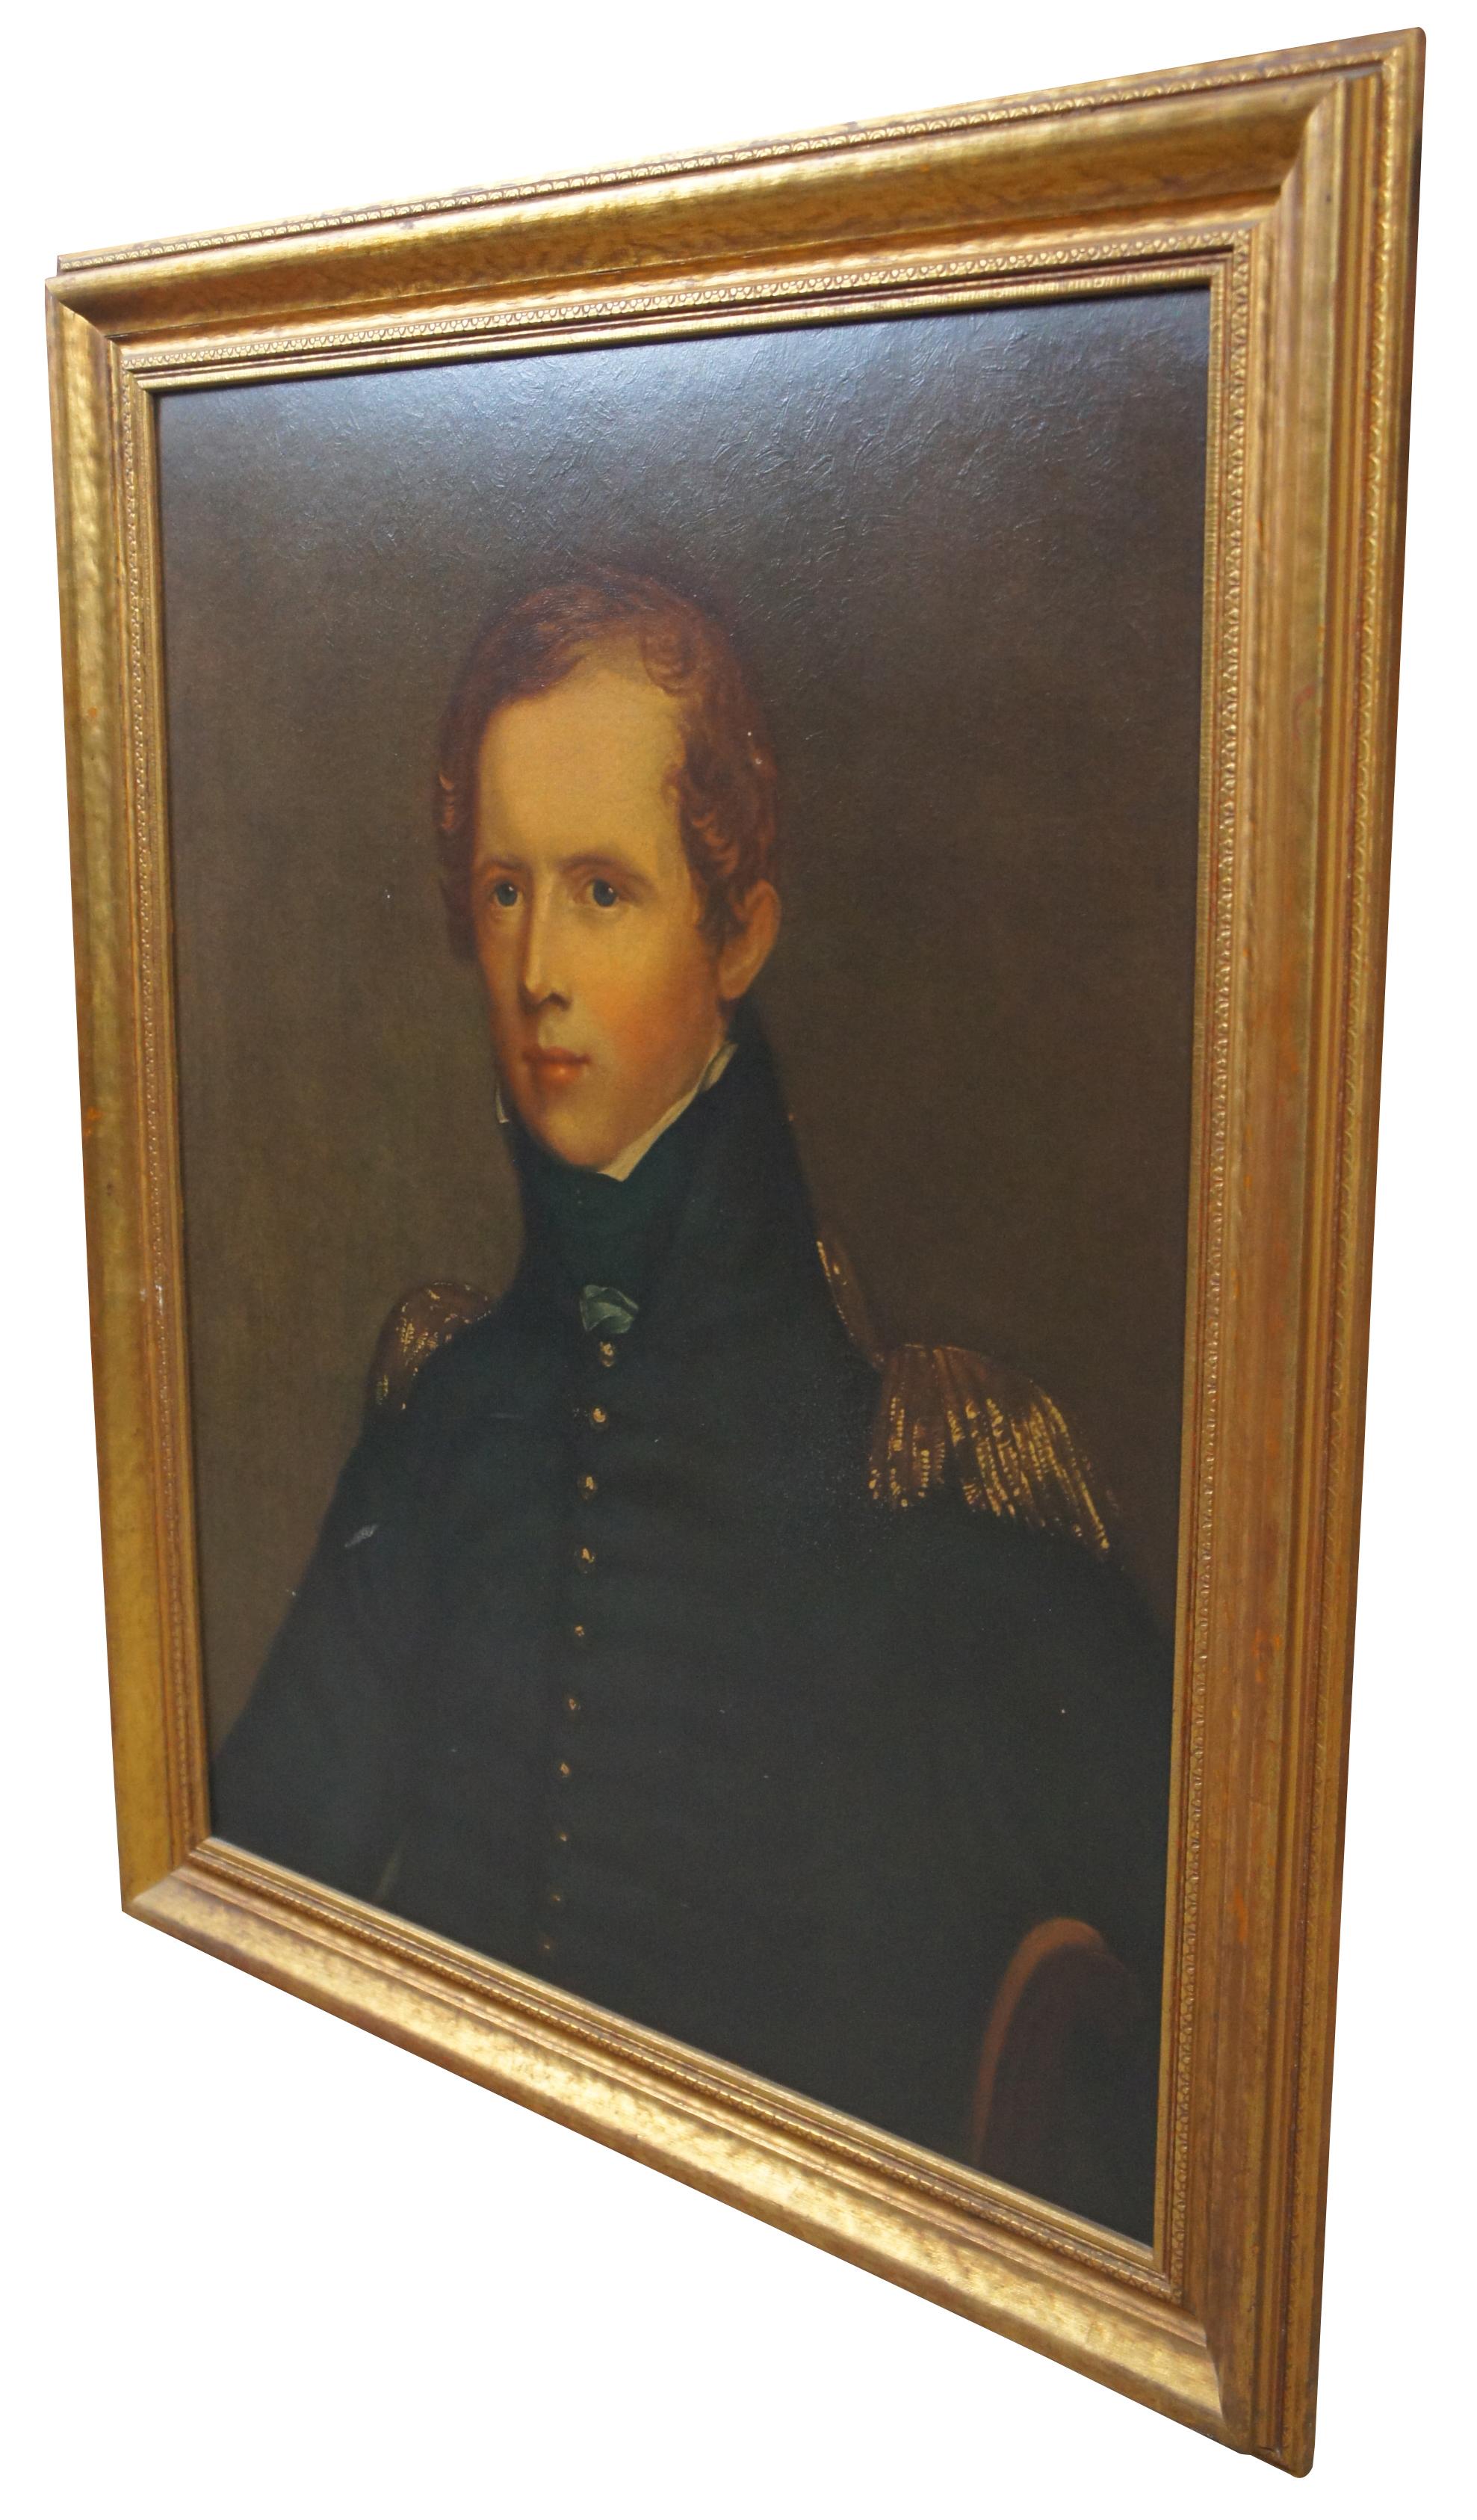 Vintage print on board of Thomas Sully’s 1818 portrait of Major John Biddle; original painting is in the Metropolitan Museum of Art. “Major John Biddle (March 2, 1792 – August 25, 1859)[1] was an American military officer, politician, and